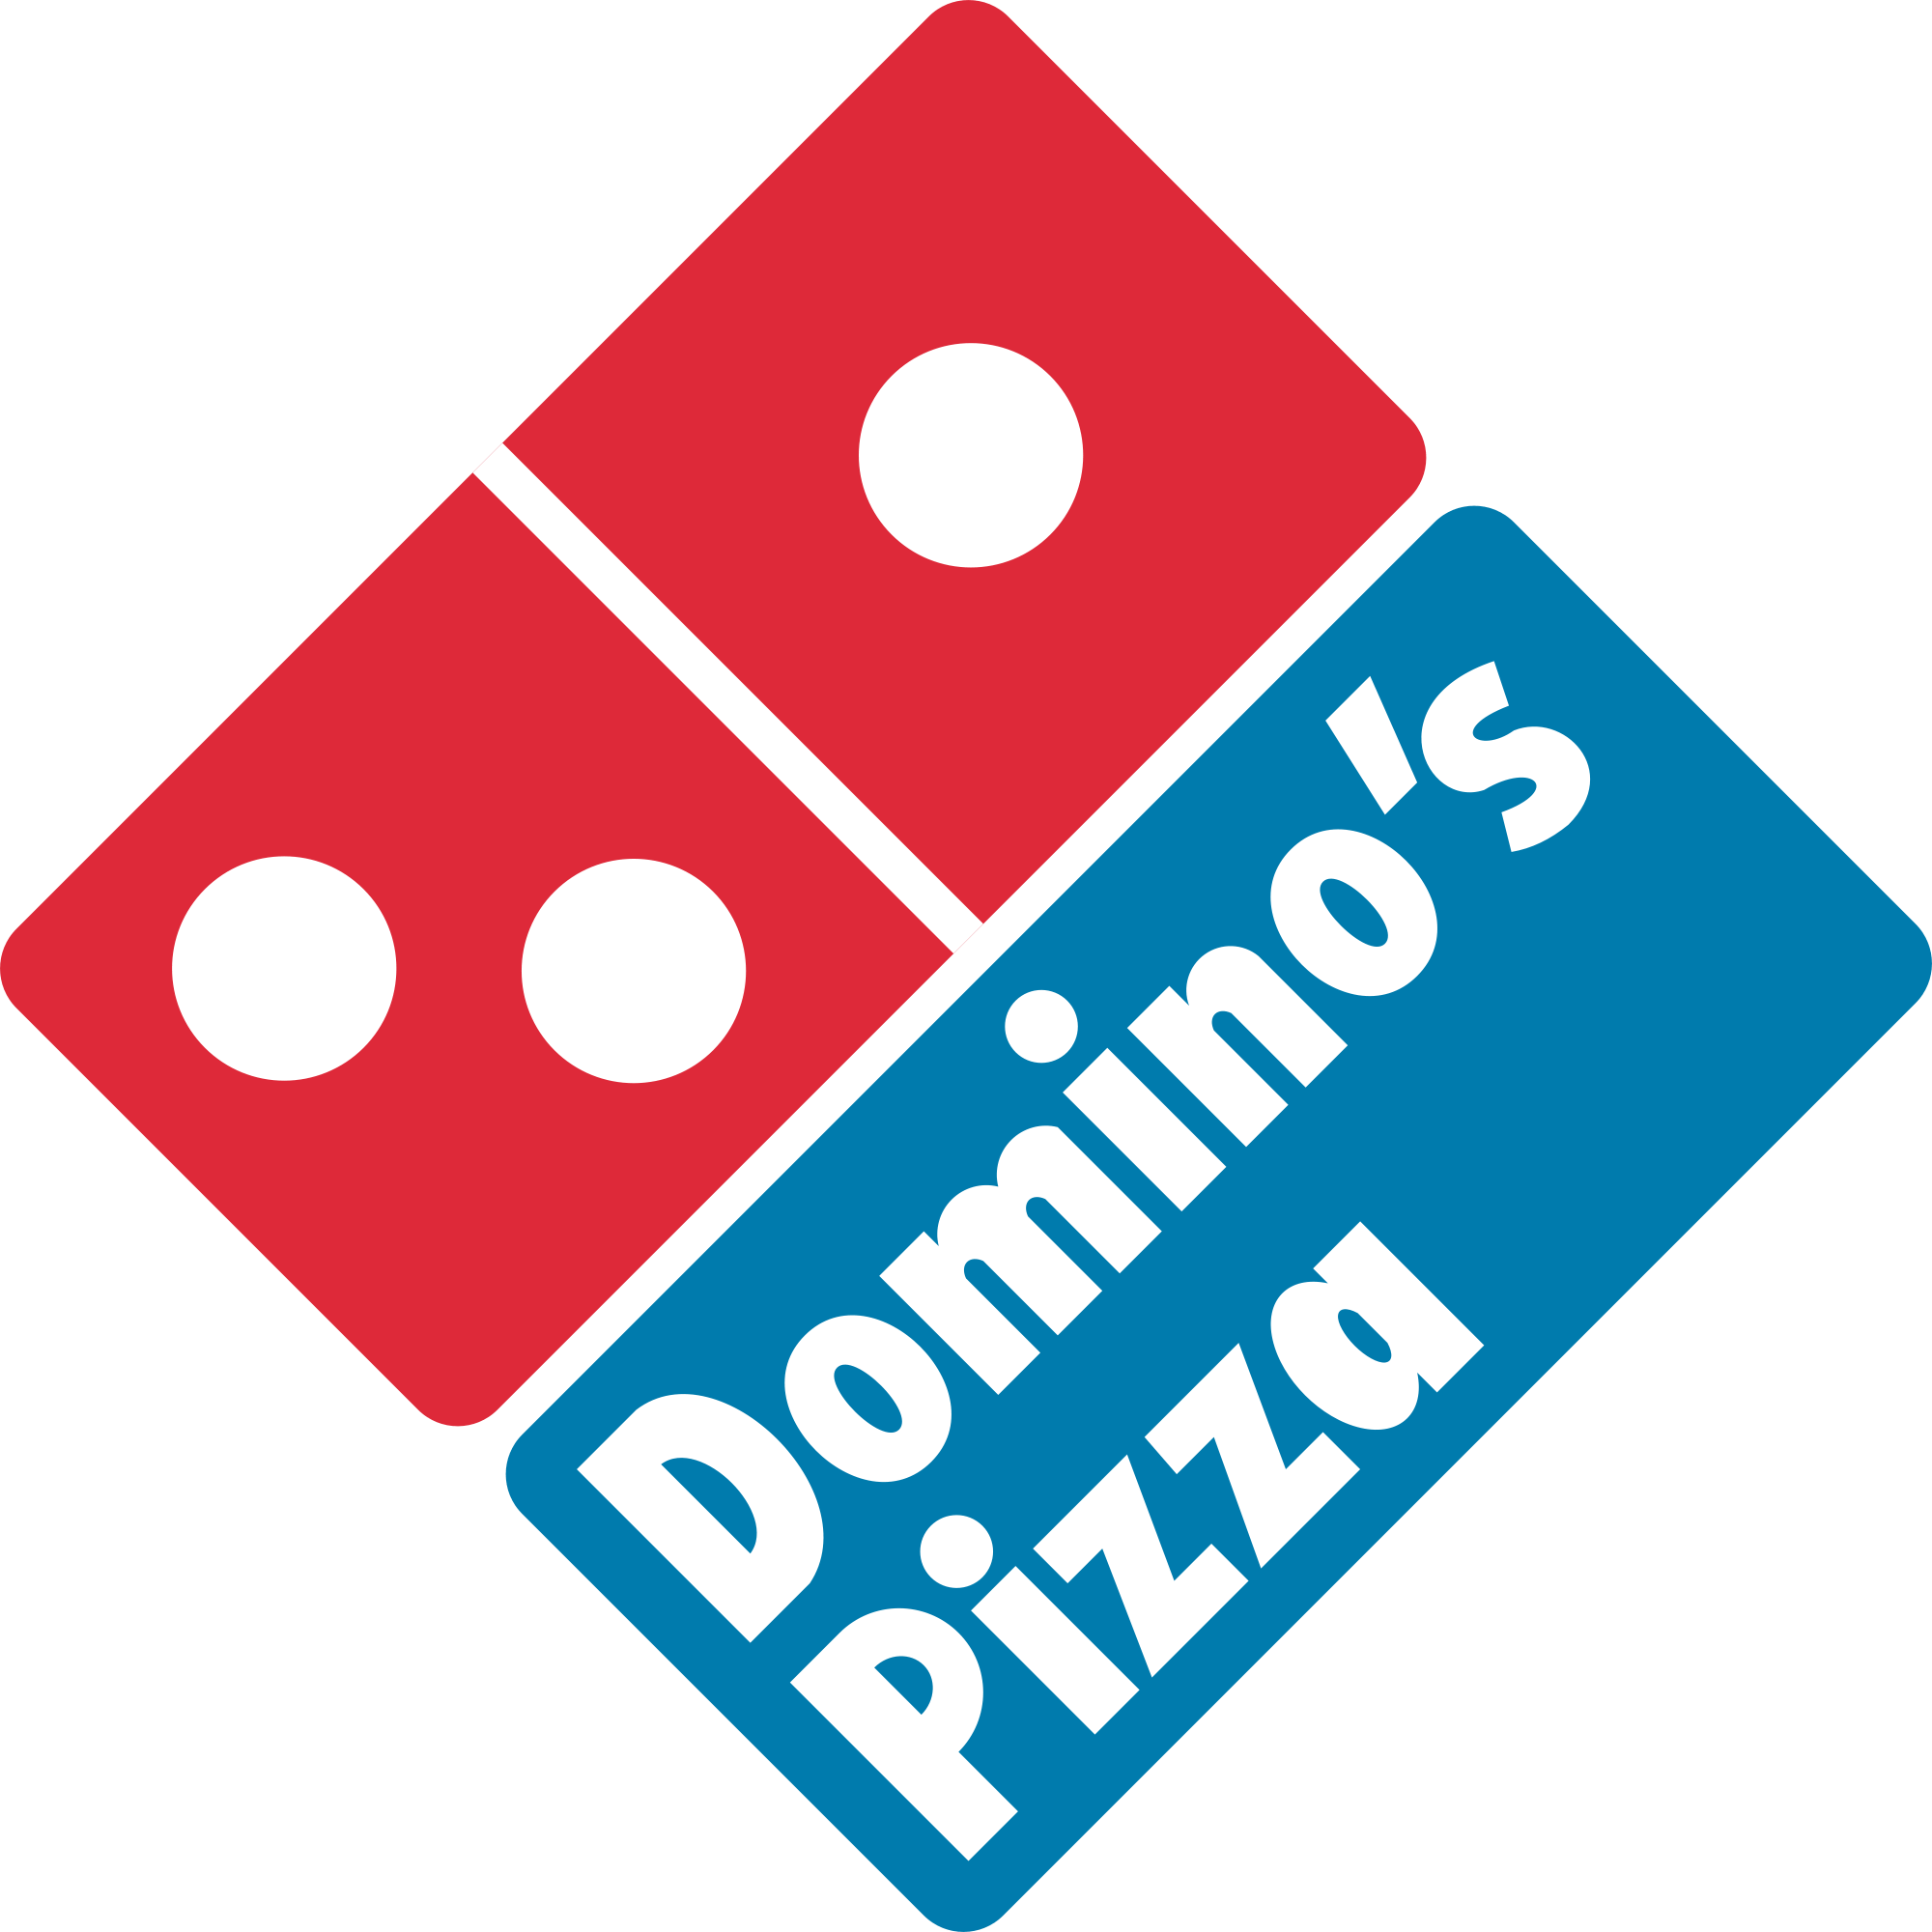 Two Red Rectangle Logo - Dominos pizza logo.svg